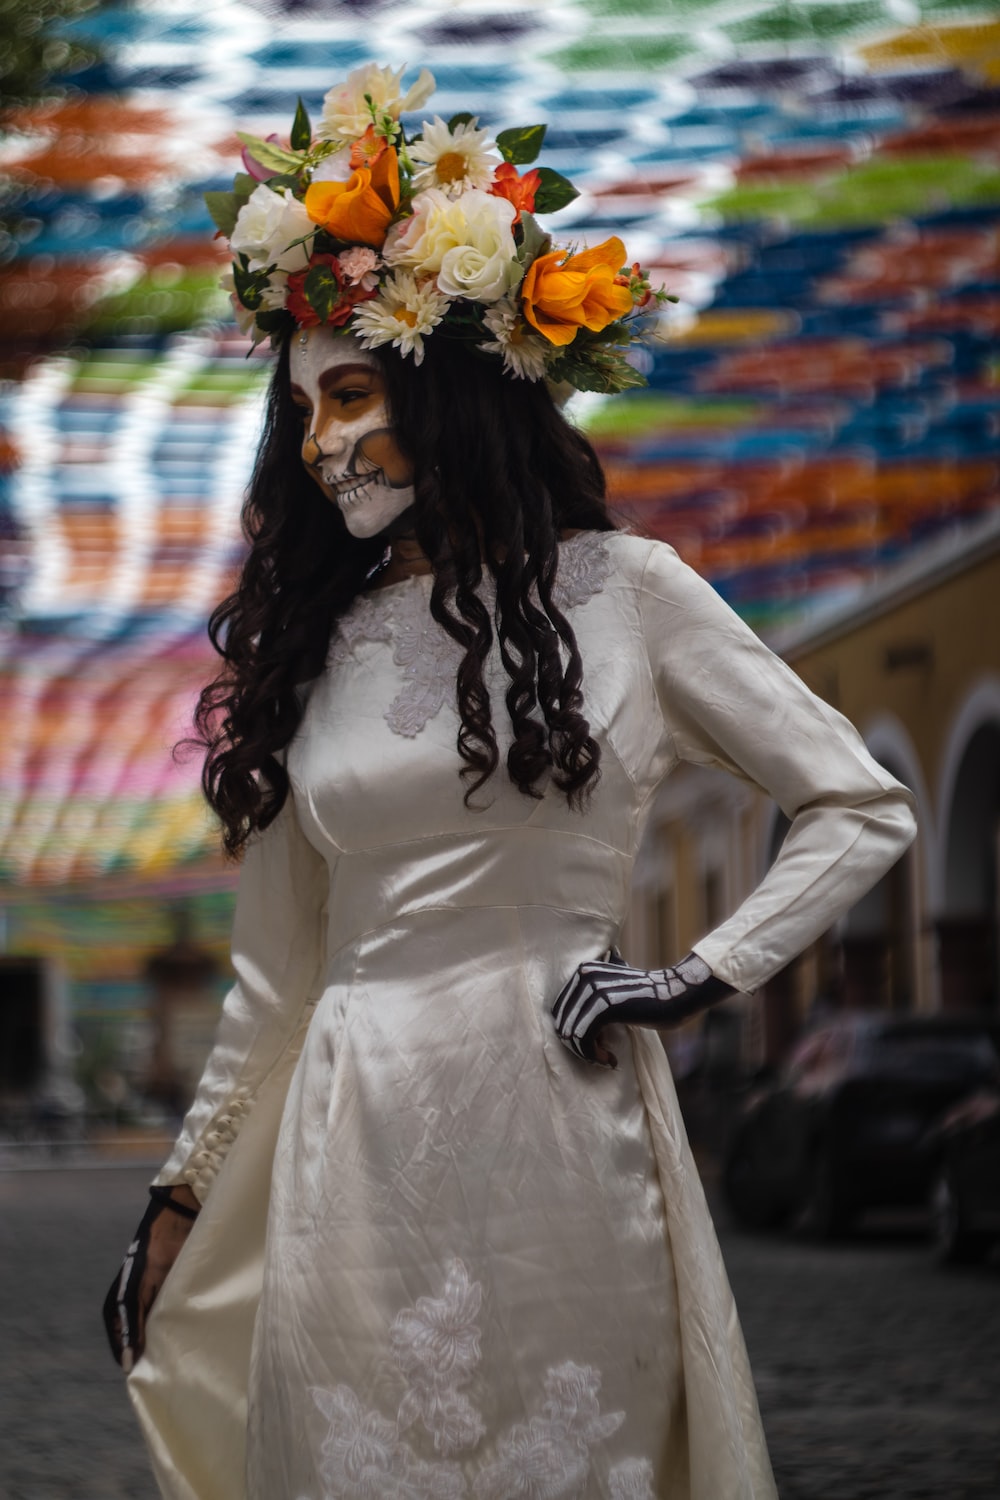 a woman wearing a mask and holding flowers